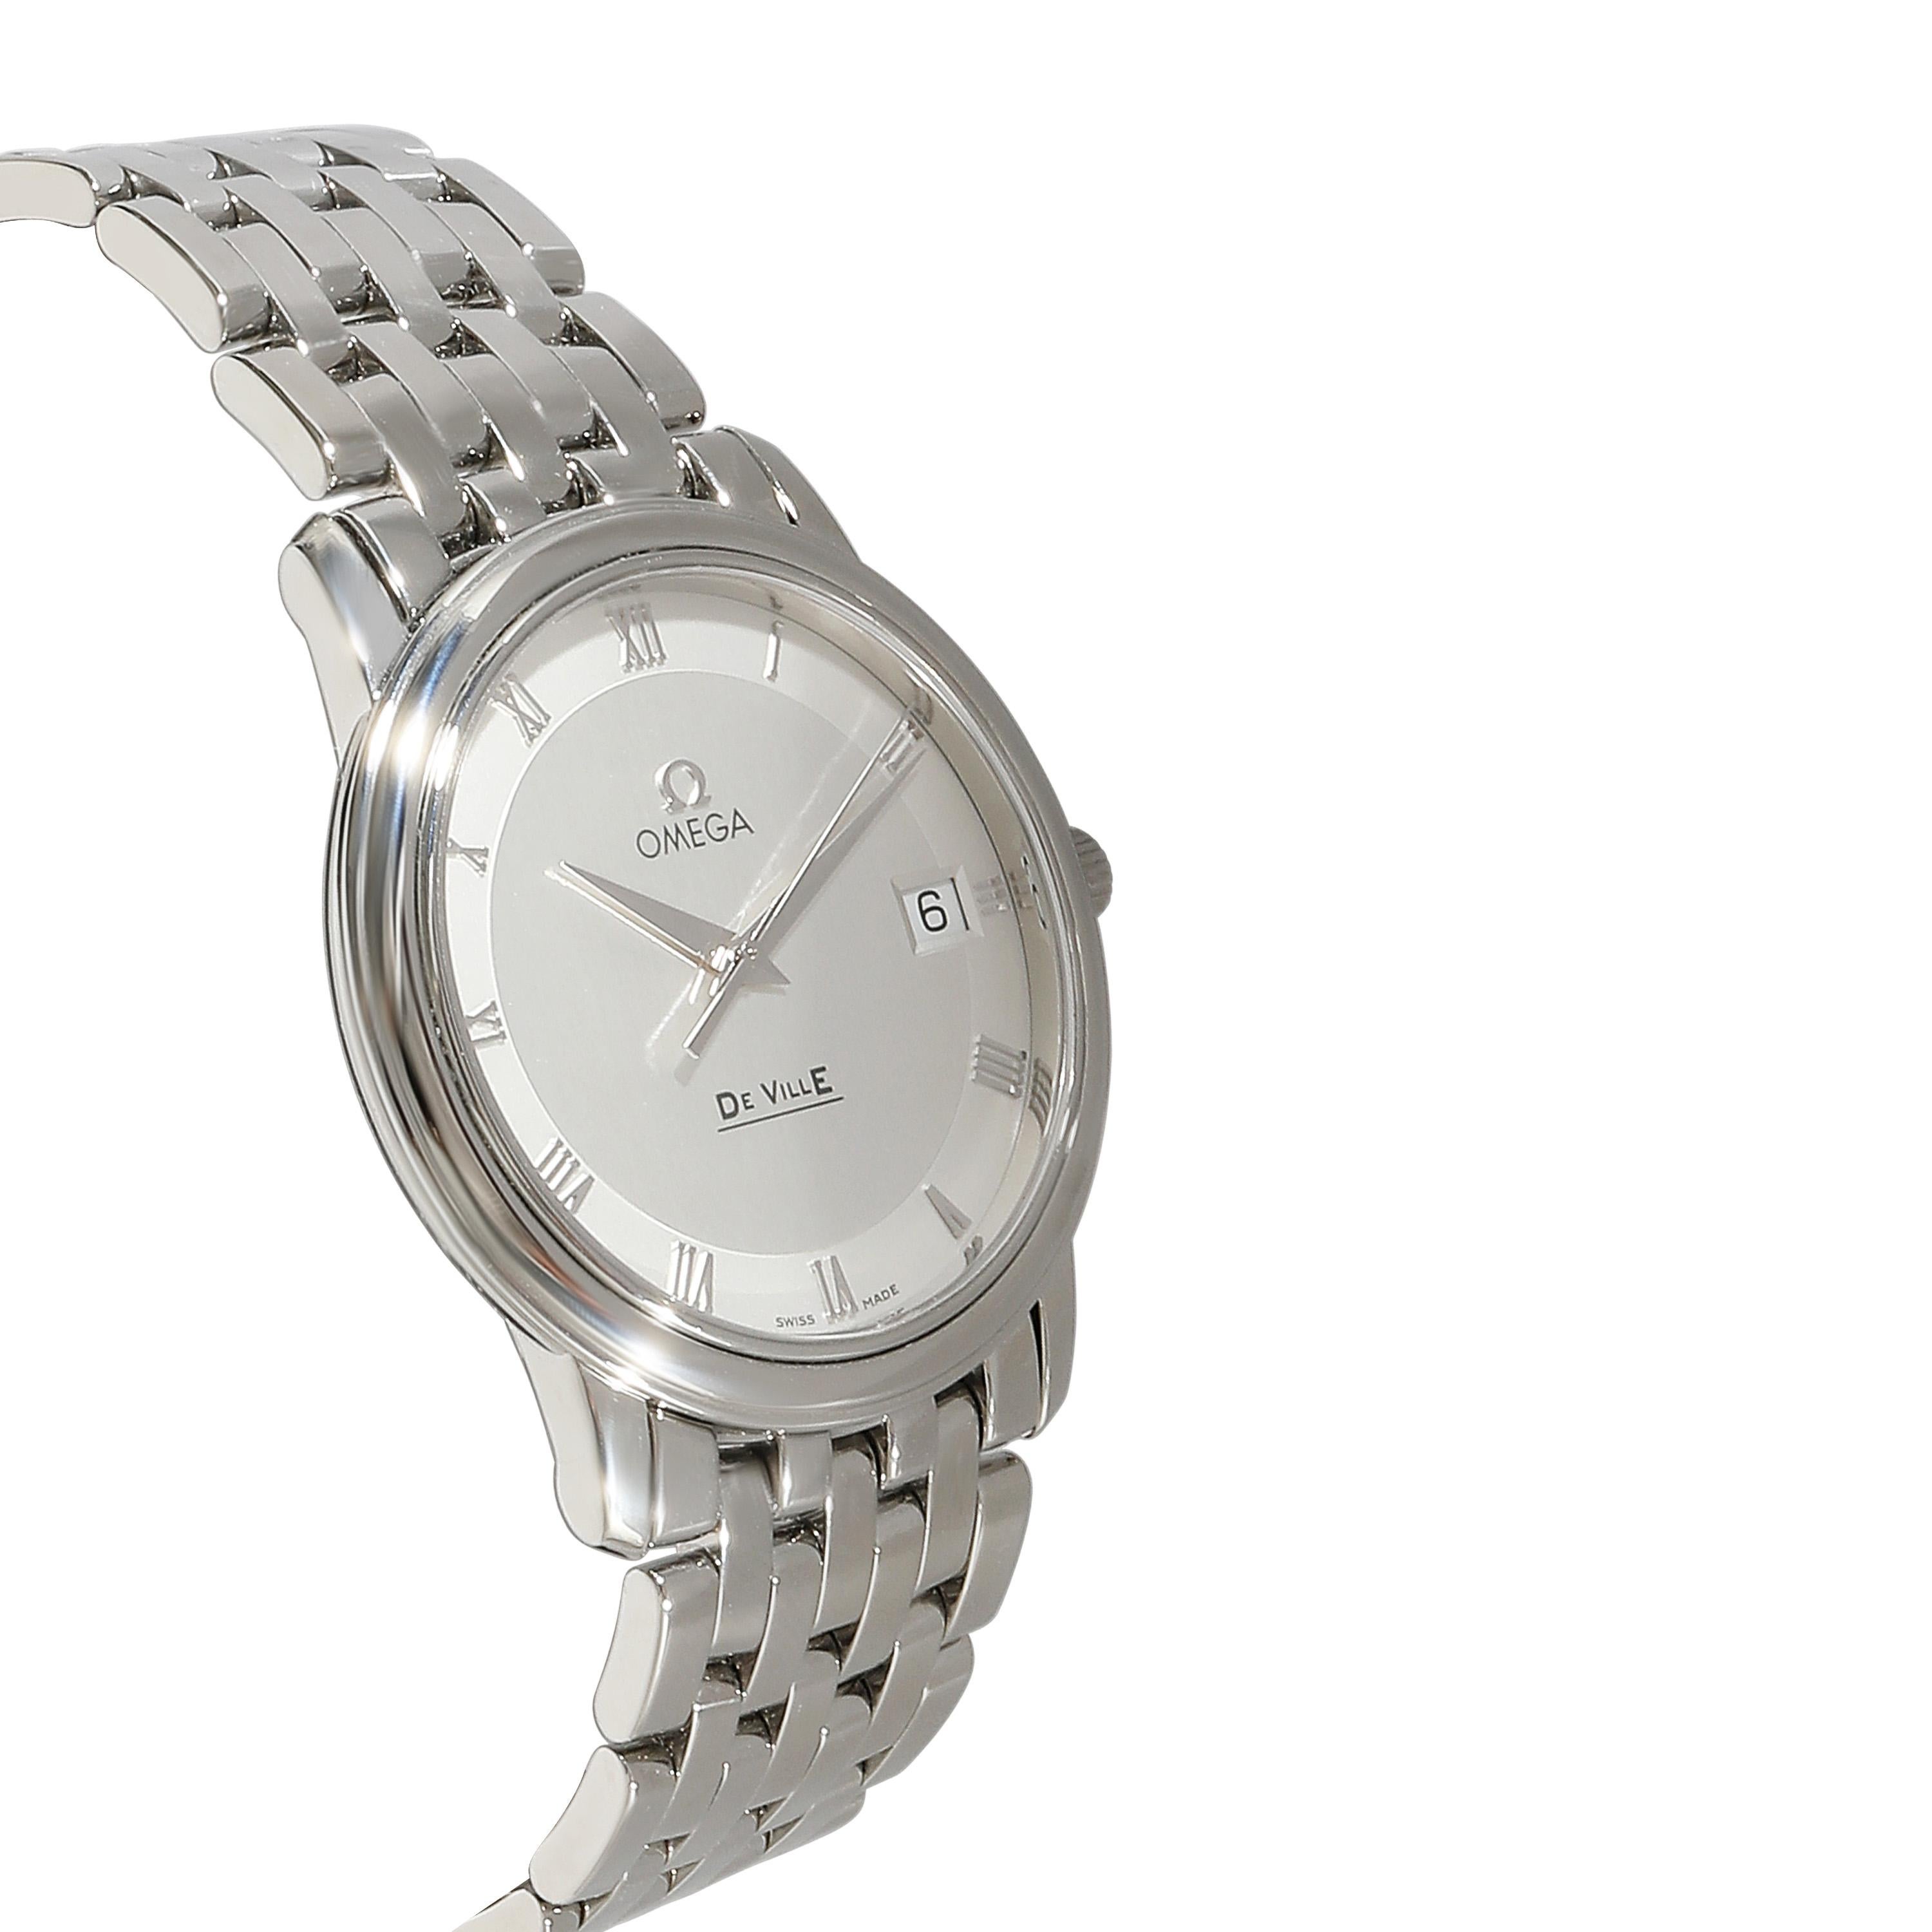 Omega DeVille 4510.33 Unisex Watch in  Stainless Steel In Excellent Condition For Sale In New York, NY